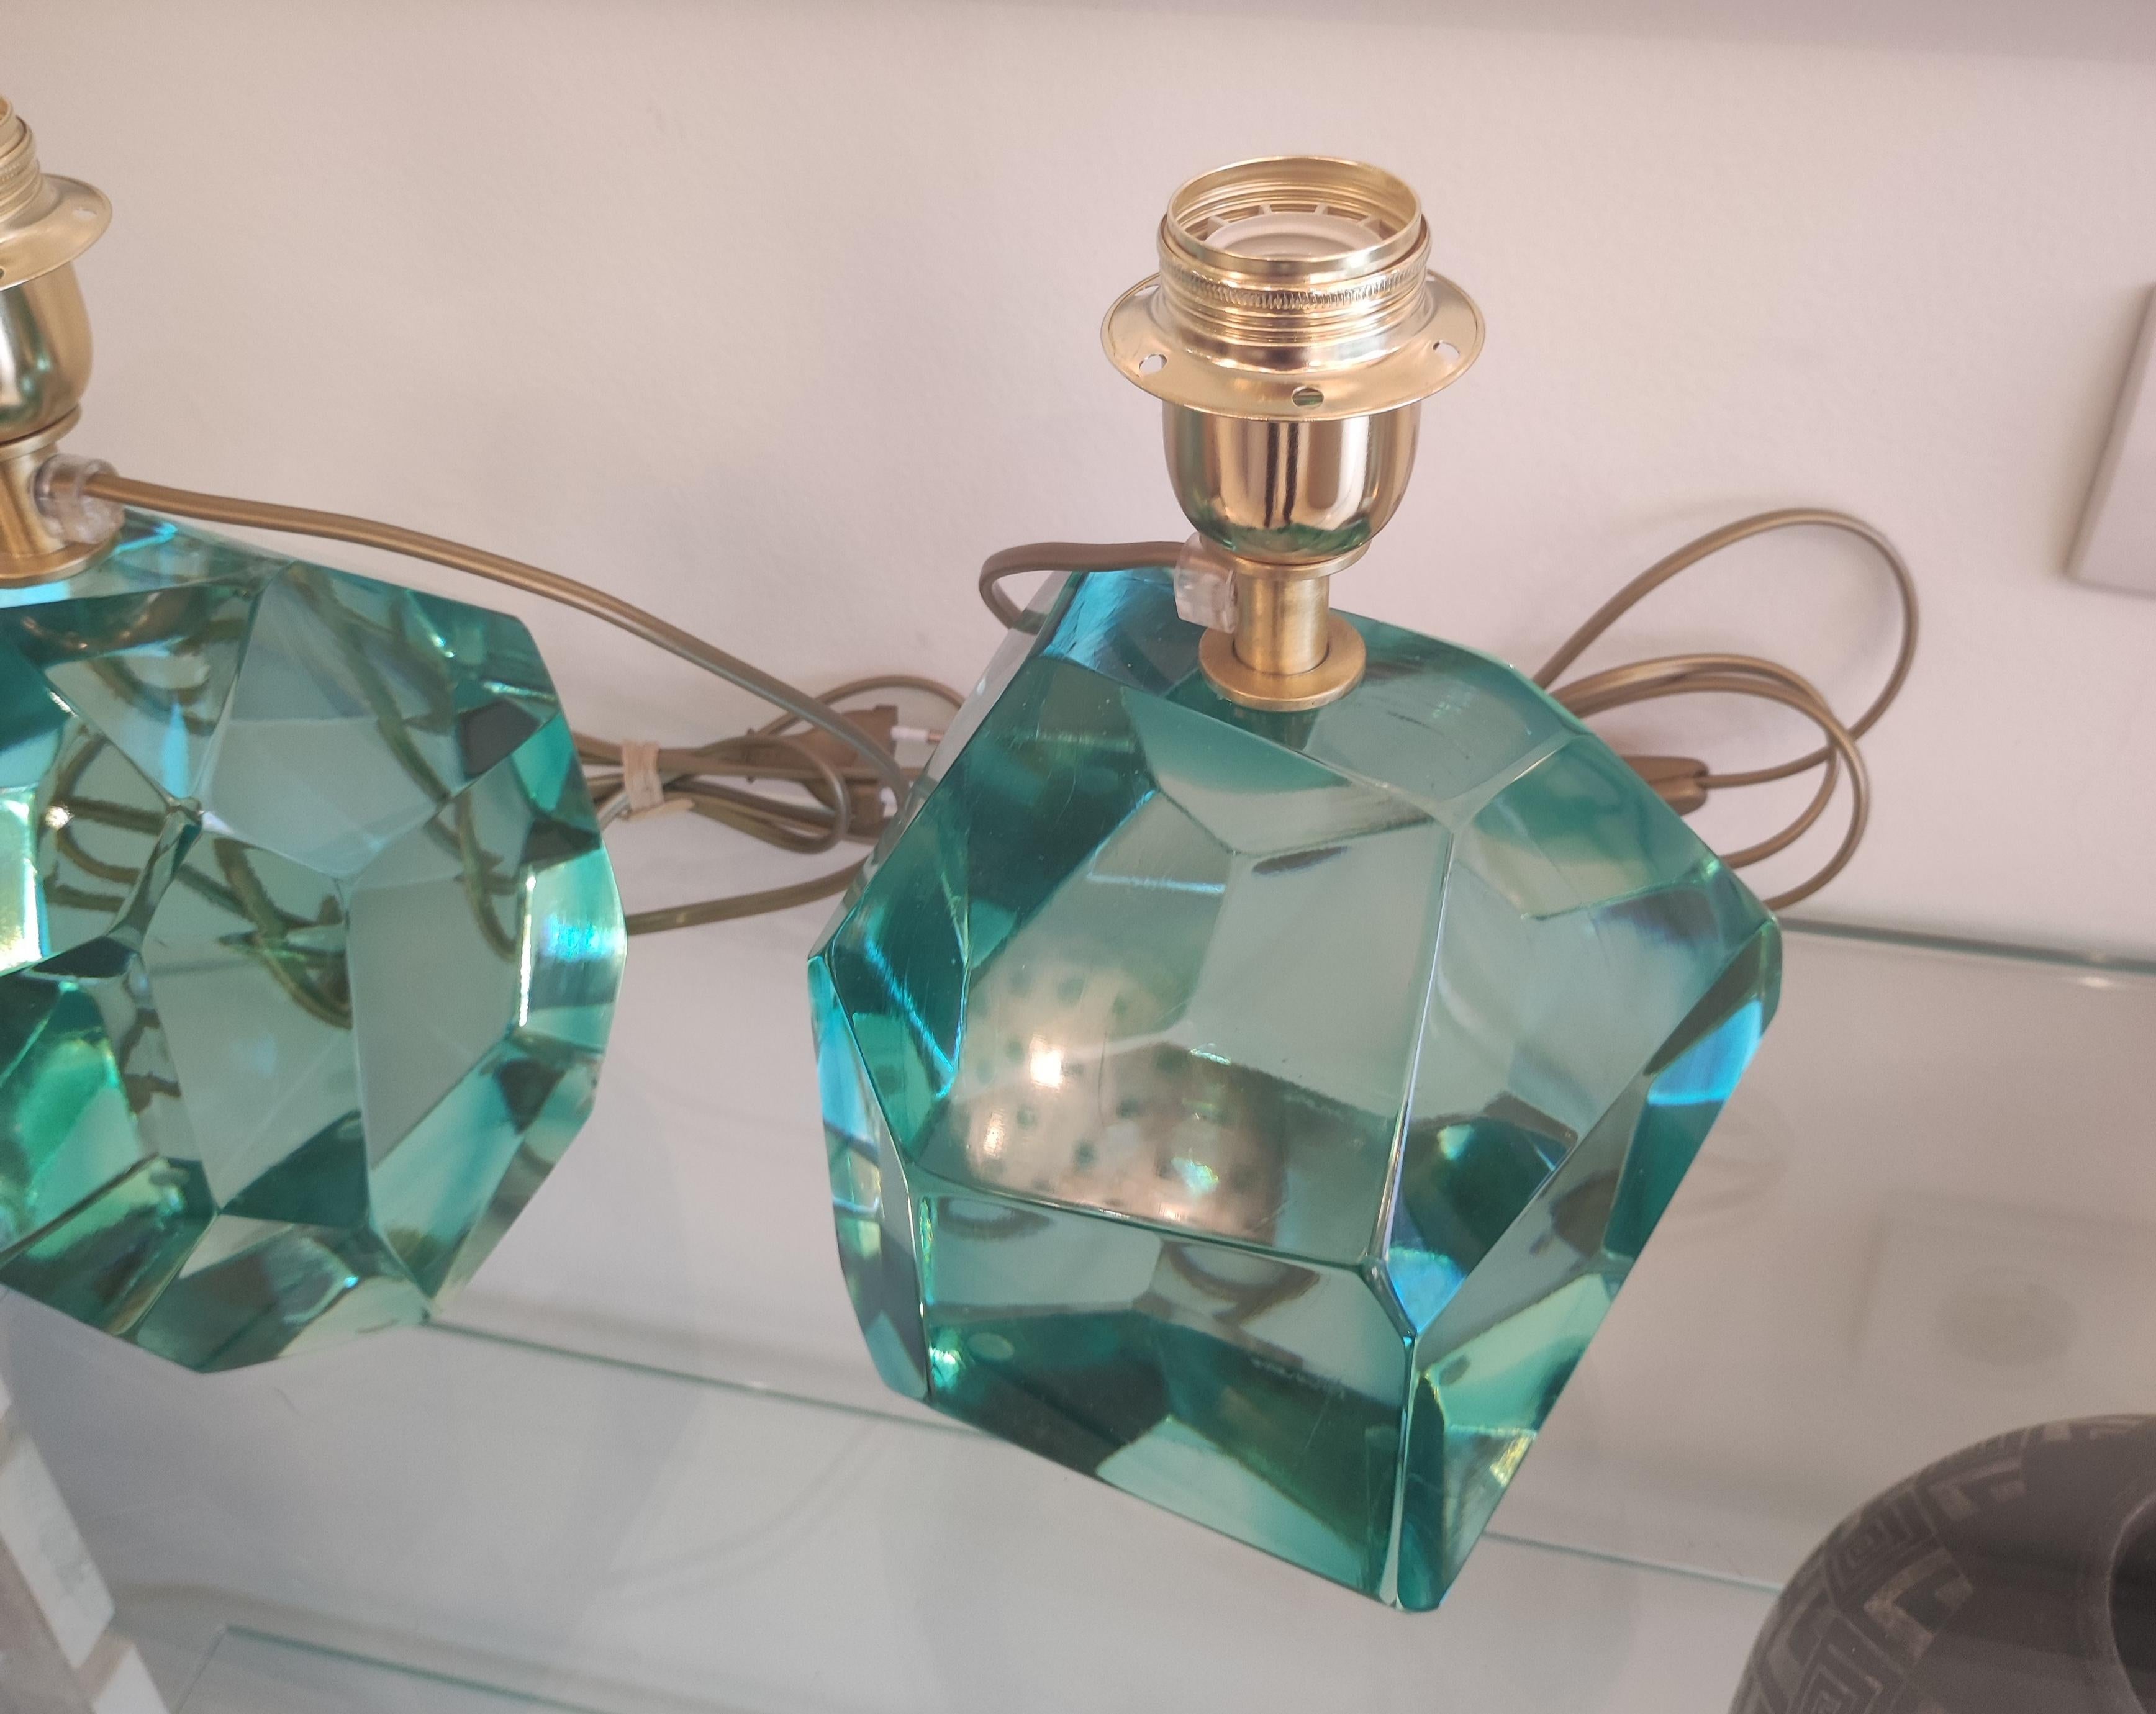 Light green crystal faceted table lamp attb Toso, perfect condition.
Pair can be separated upon request. E27 bulbs compatible US E26